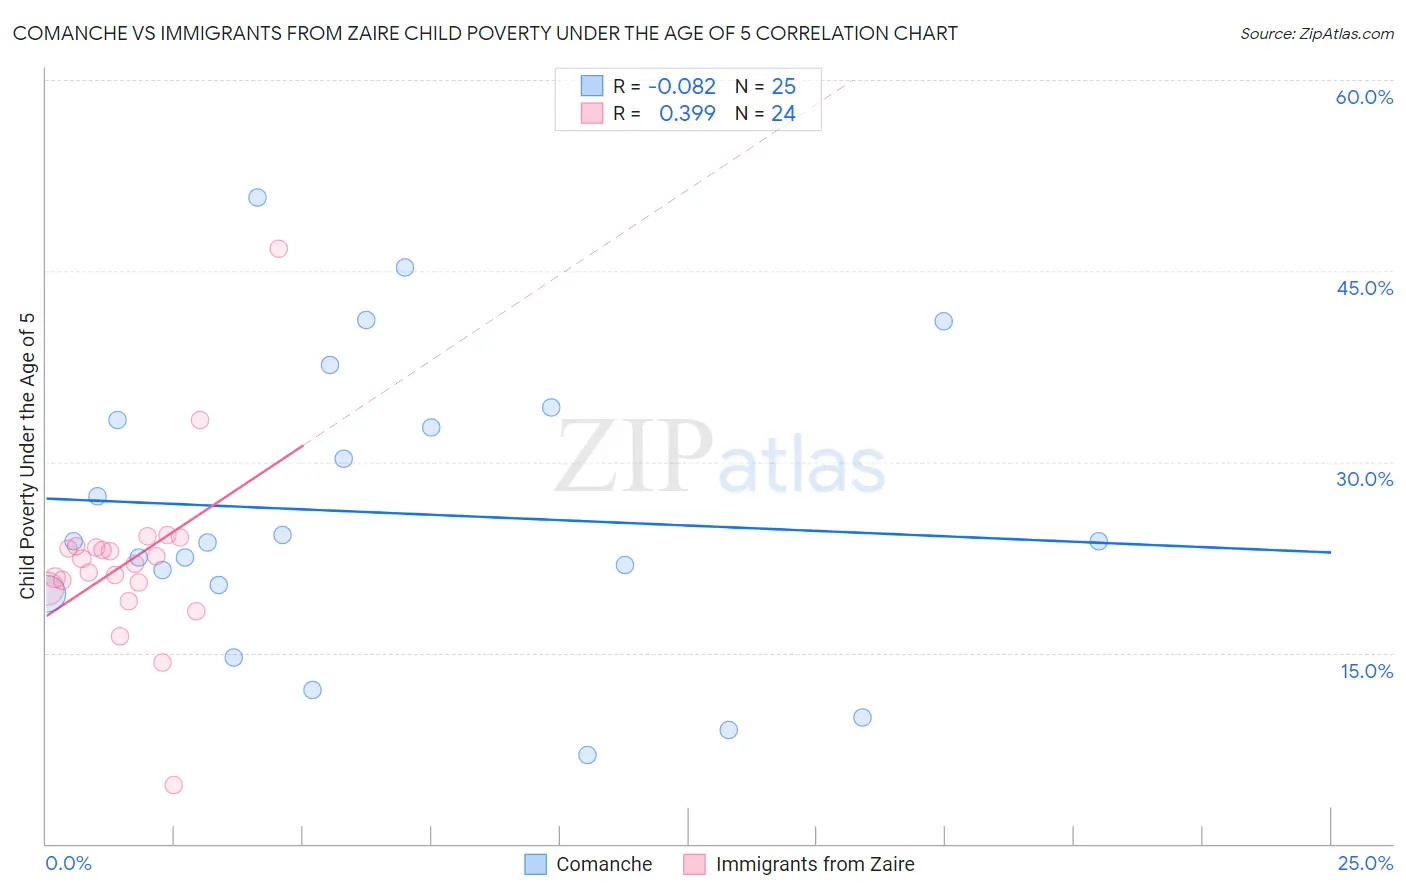 Comanche vs Immigrants from Zaire Child Poverty Under the Age of 5